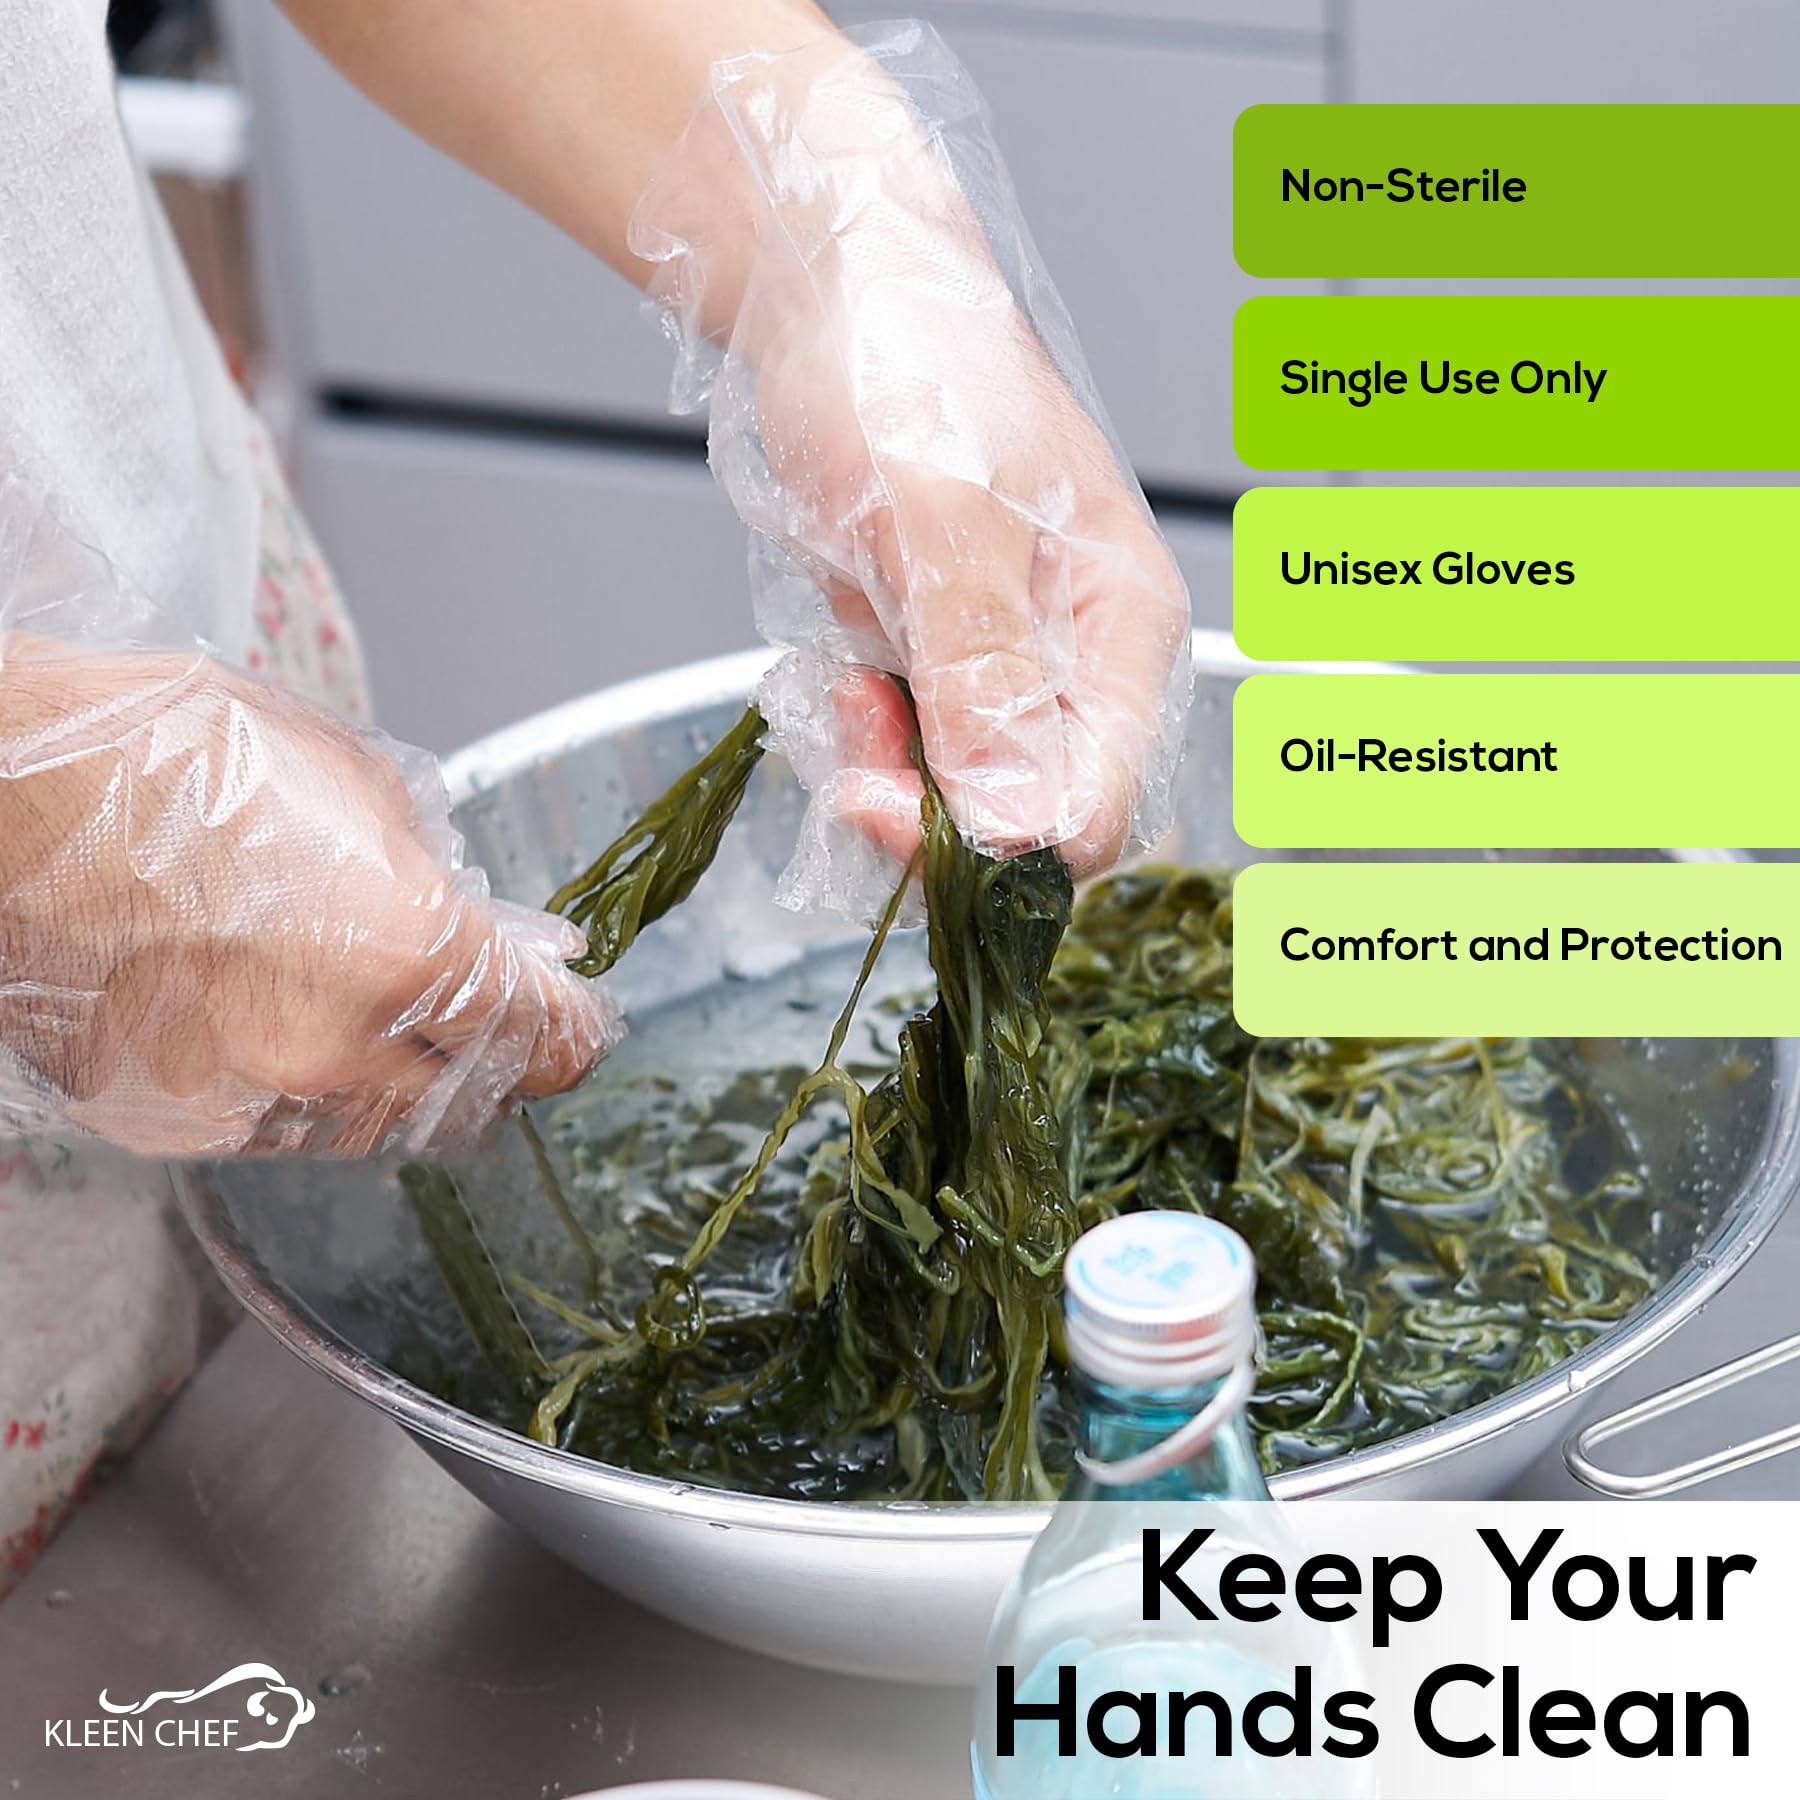 KLEEN CHEF 1050 PCS Plastic Disposable Gloves Medium | Clear Disposable Gloves for Food Prep, Cooking, Cleaning, Food Handling